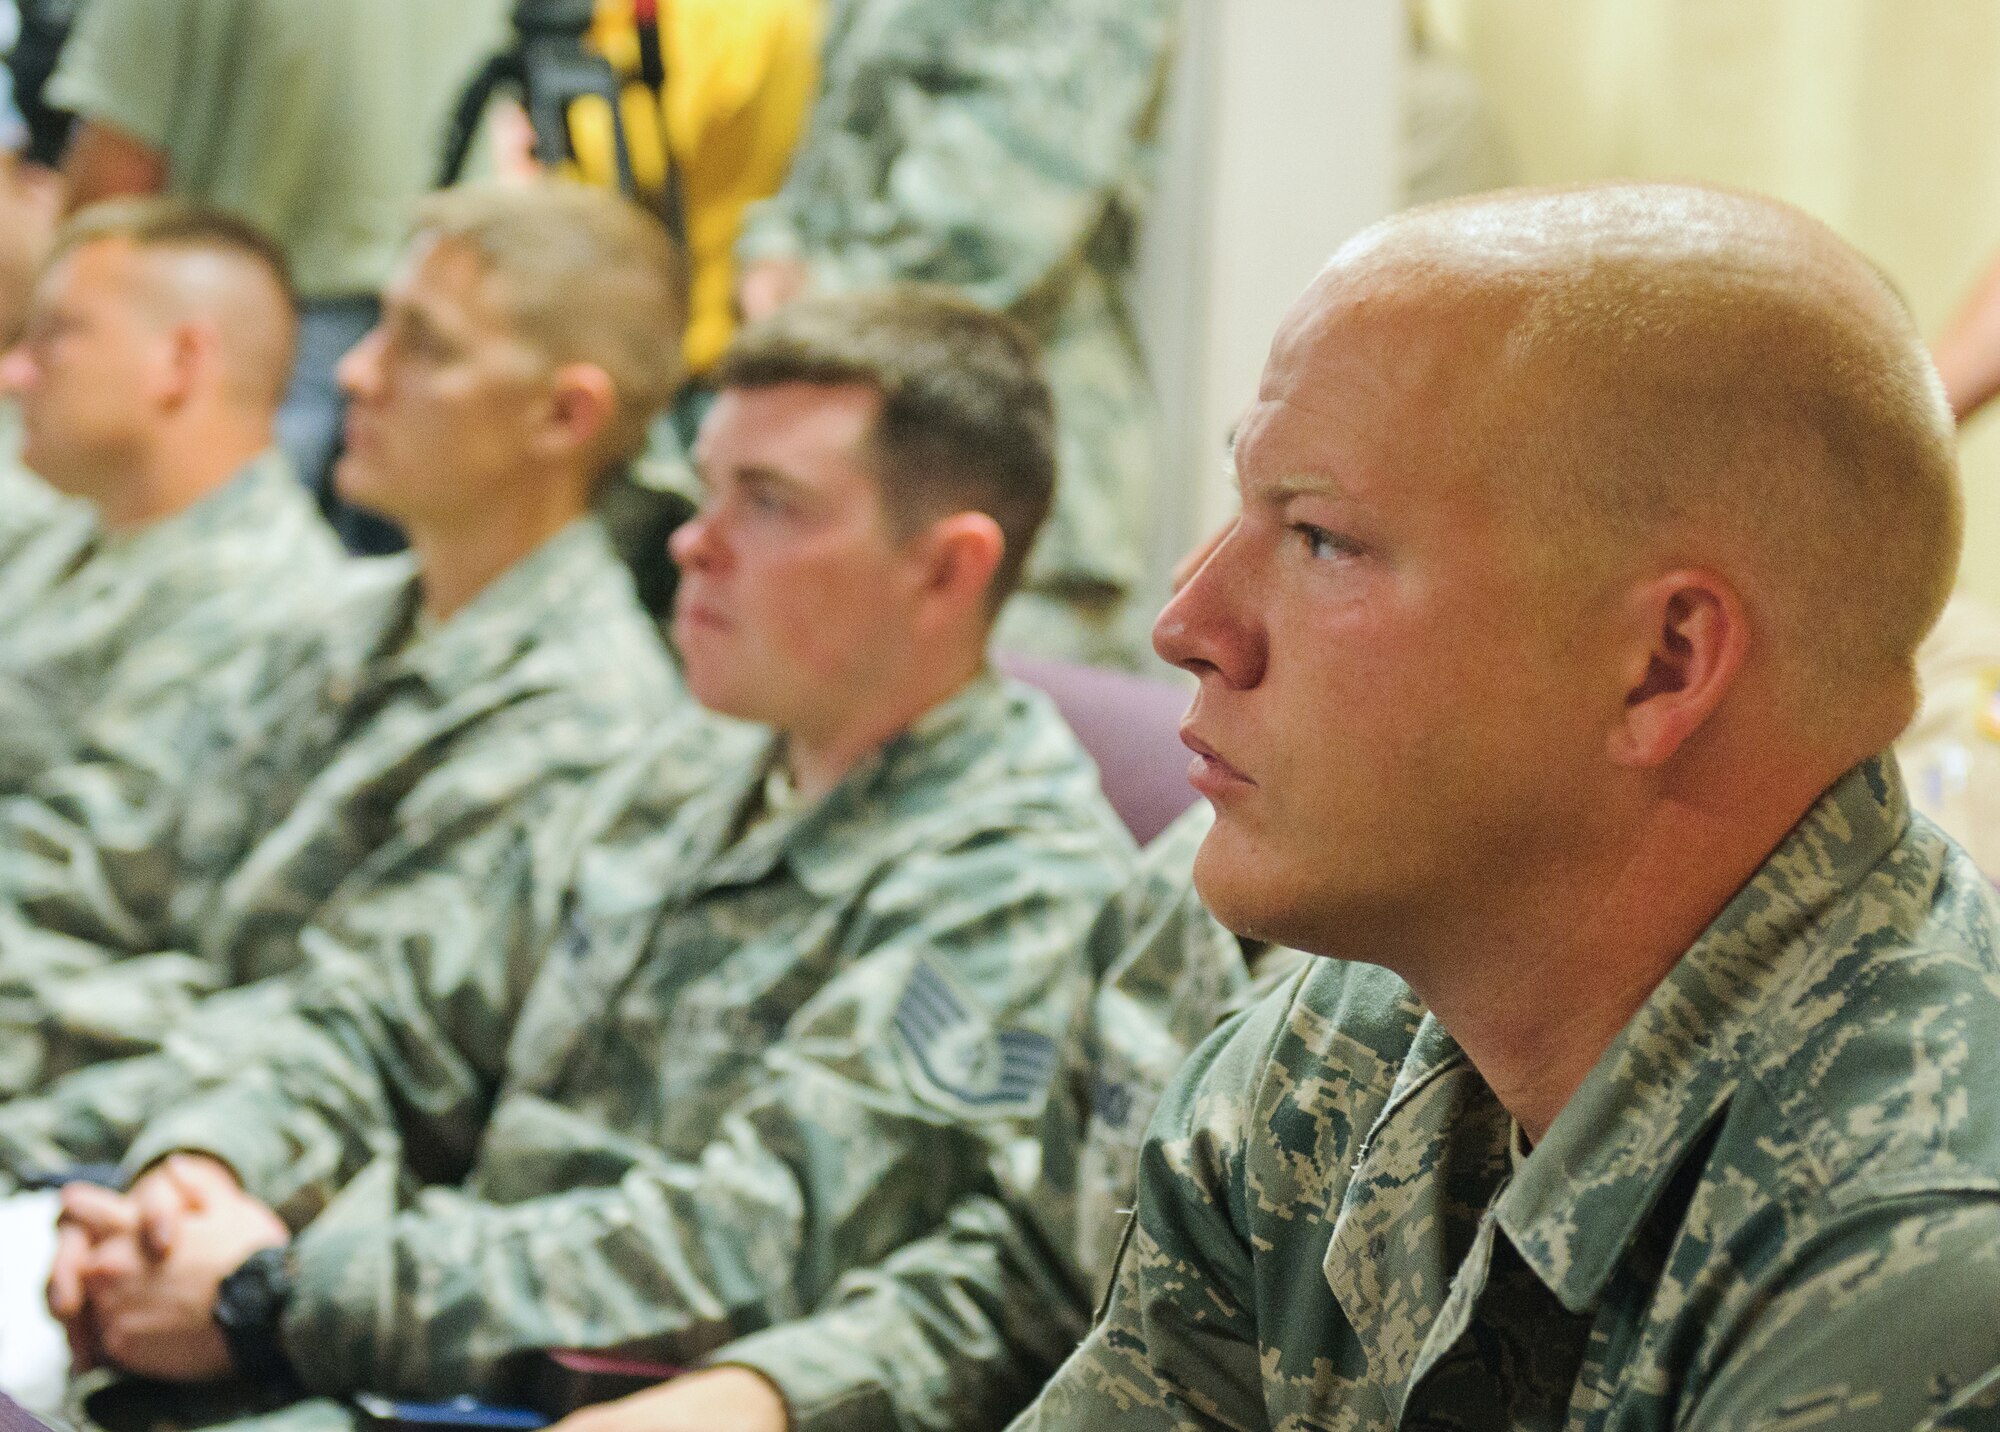 Tech. Sgt. Matthew Hourigan, an aircraft mechanic for the Kentucky Air National Guard's 123rd Aircraft Maintenance Squadron, listens to a pre-deployment briefing prior to takeoff at the Kentucky Air National Guard Base in Louisville, Ky., on July 2, 2012. The 123rd Airlift Wing deployed 70 Airmen and two C-130 aircraft to the Persian Gulf region in support of operations Enduring Freedom and New Dawn. (U.S. Air Force photo by Master Sgt. Phil Speck)